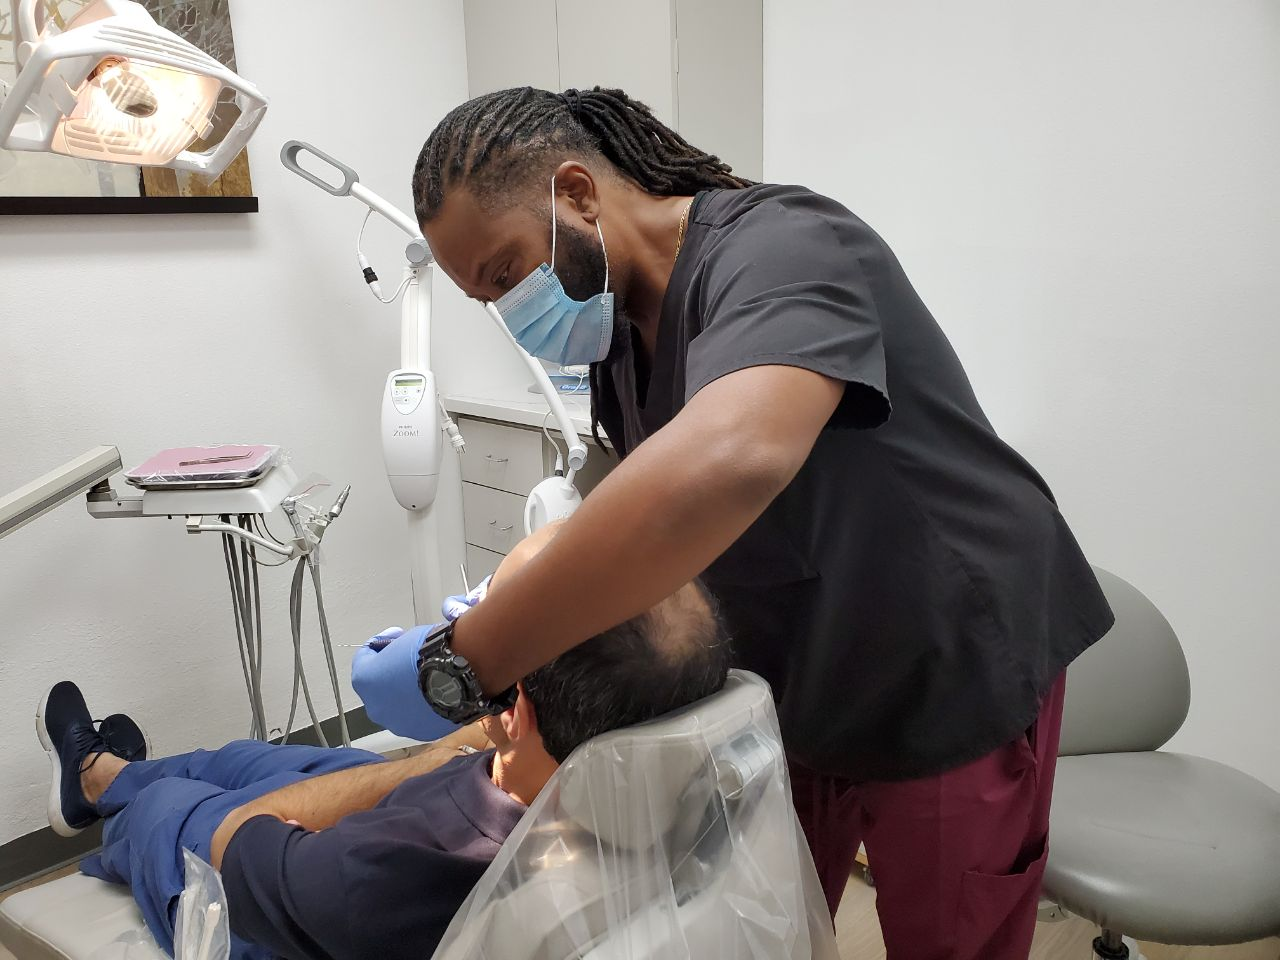 A dentist is examining a patient's teeth